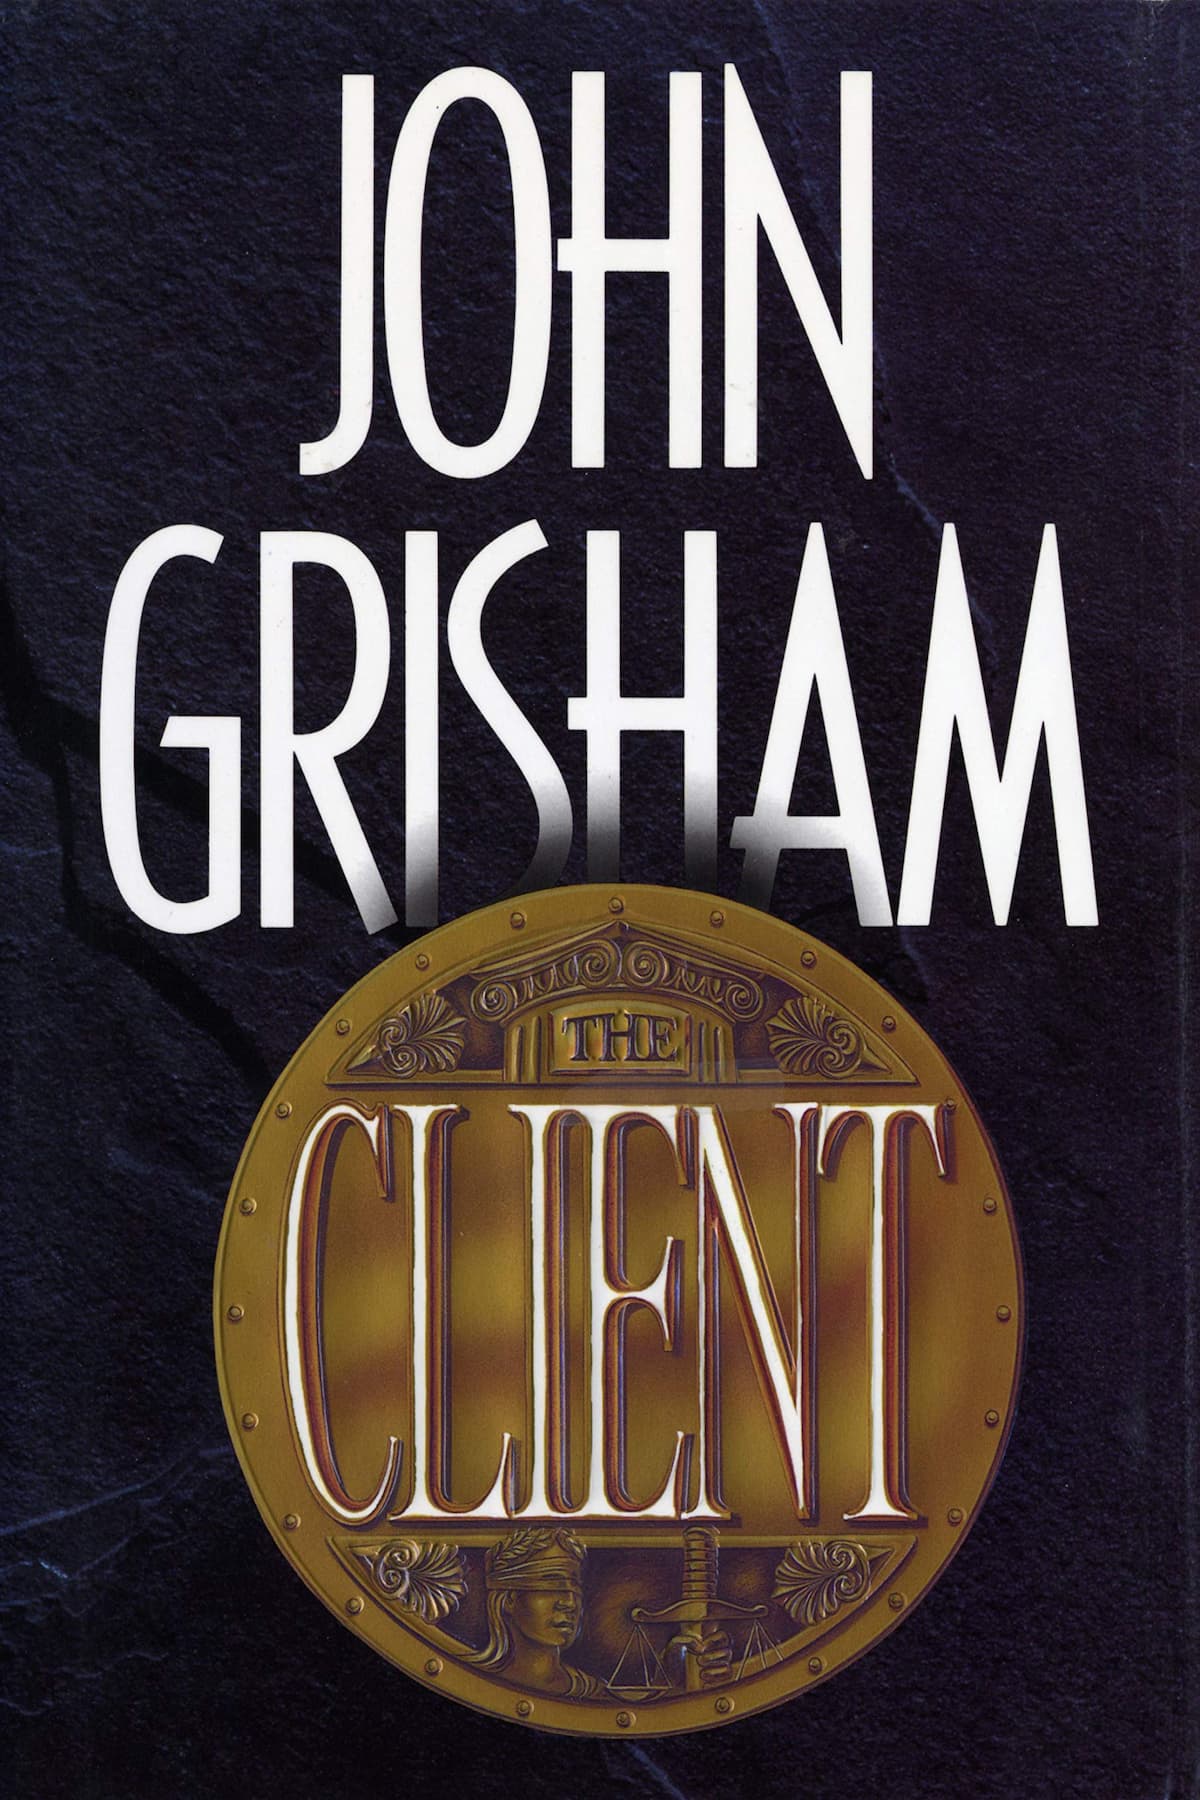 If you’re one who enjoys recharging your energies during the holidays, you’ll find "The Client – John Grisham" very helpful!